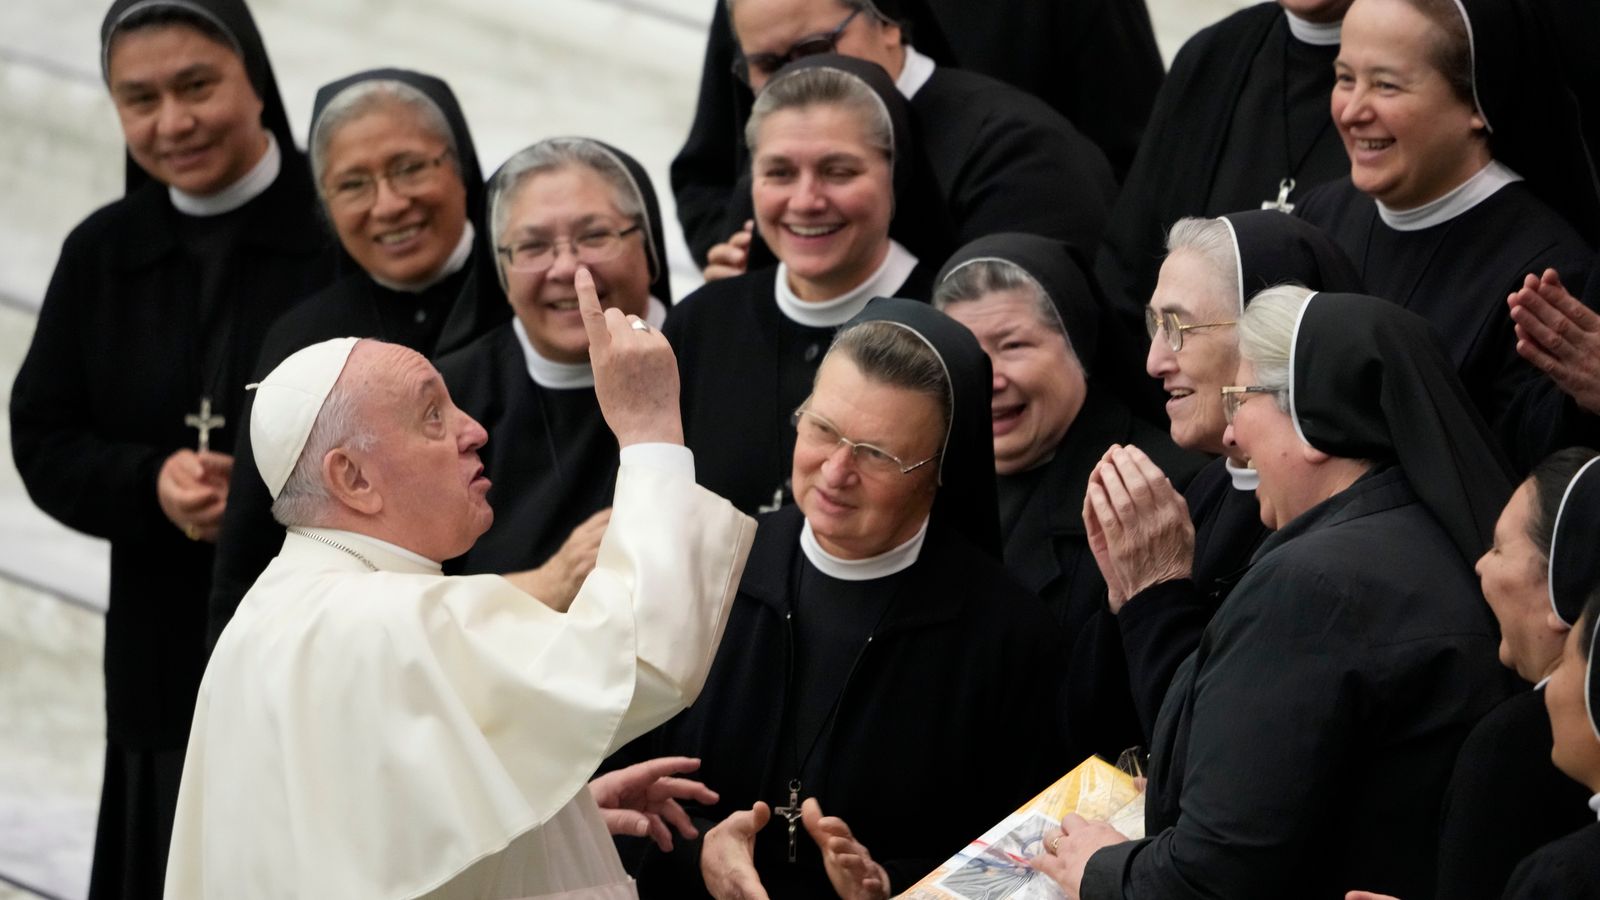 Pope Francis gives women vote in upcoming influential bishops' meeting